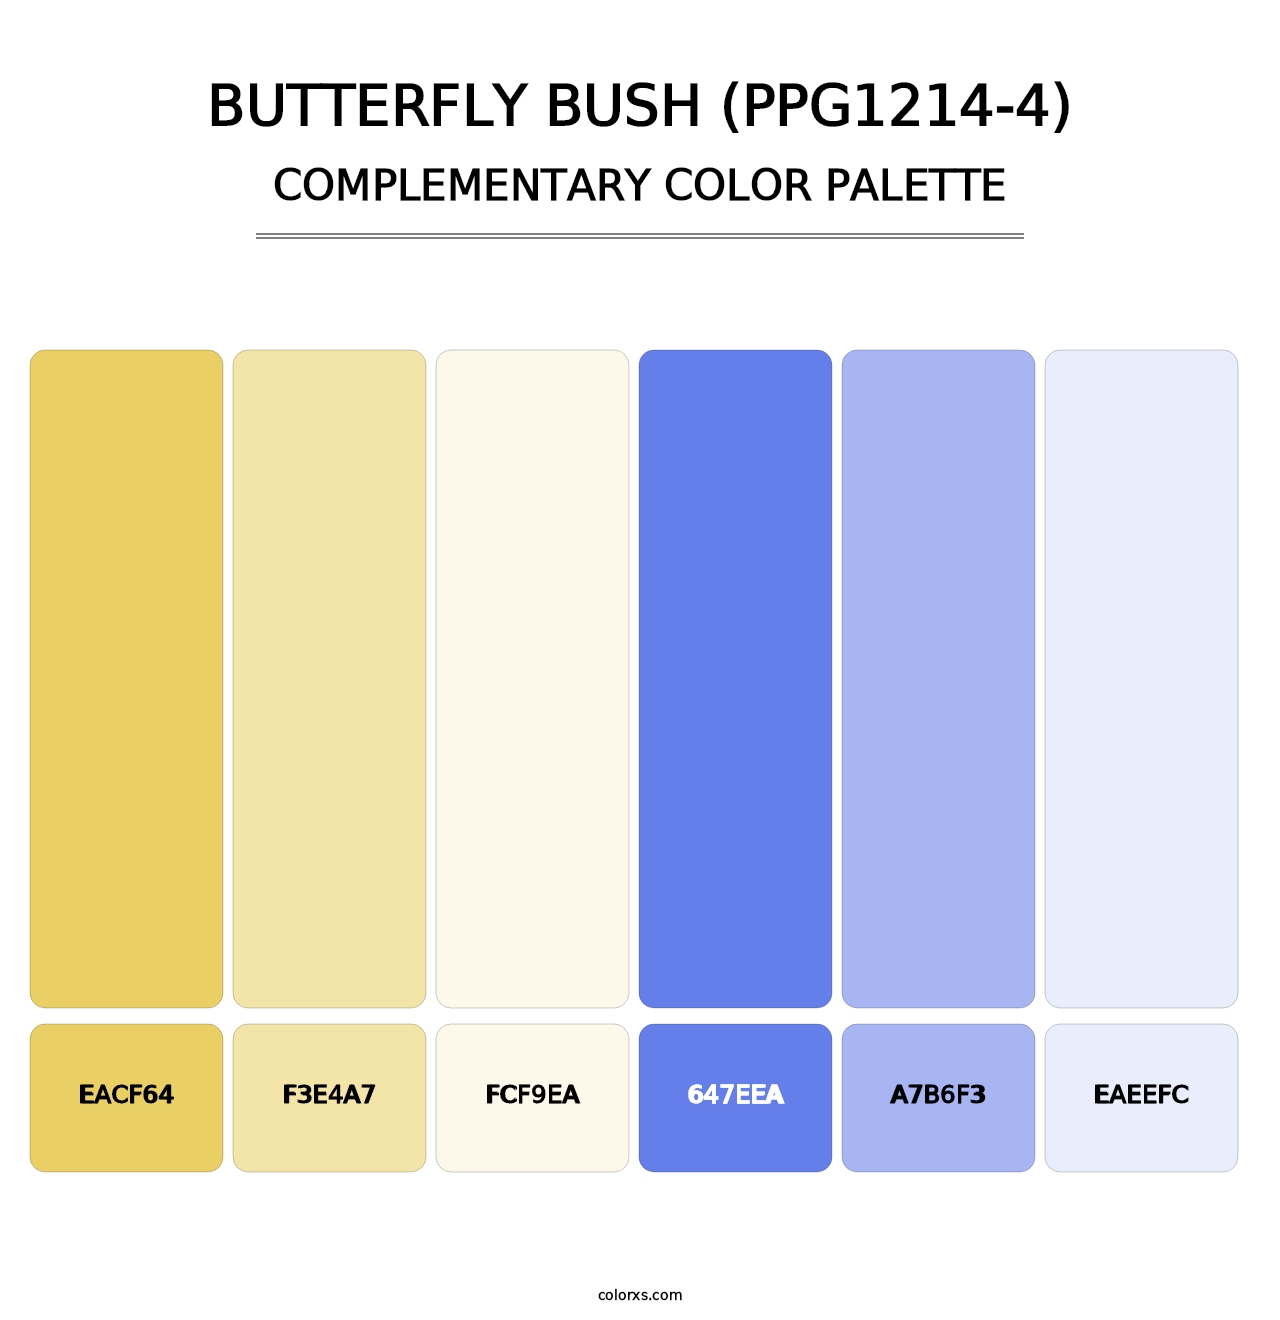 Butterfly Bush (PPG1214-4) - Complementary Color Palette